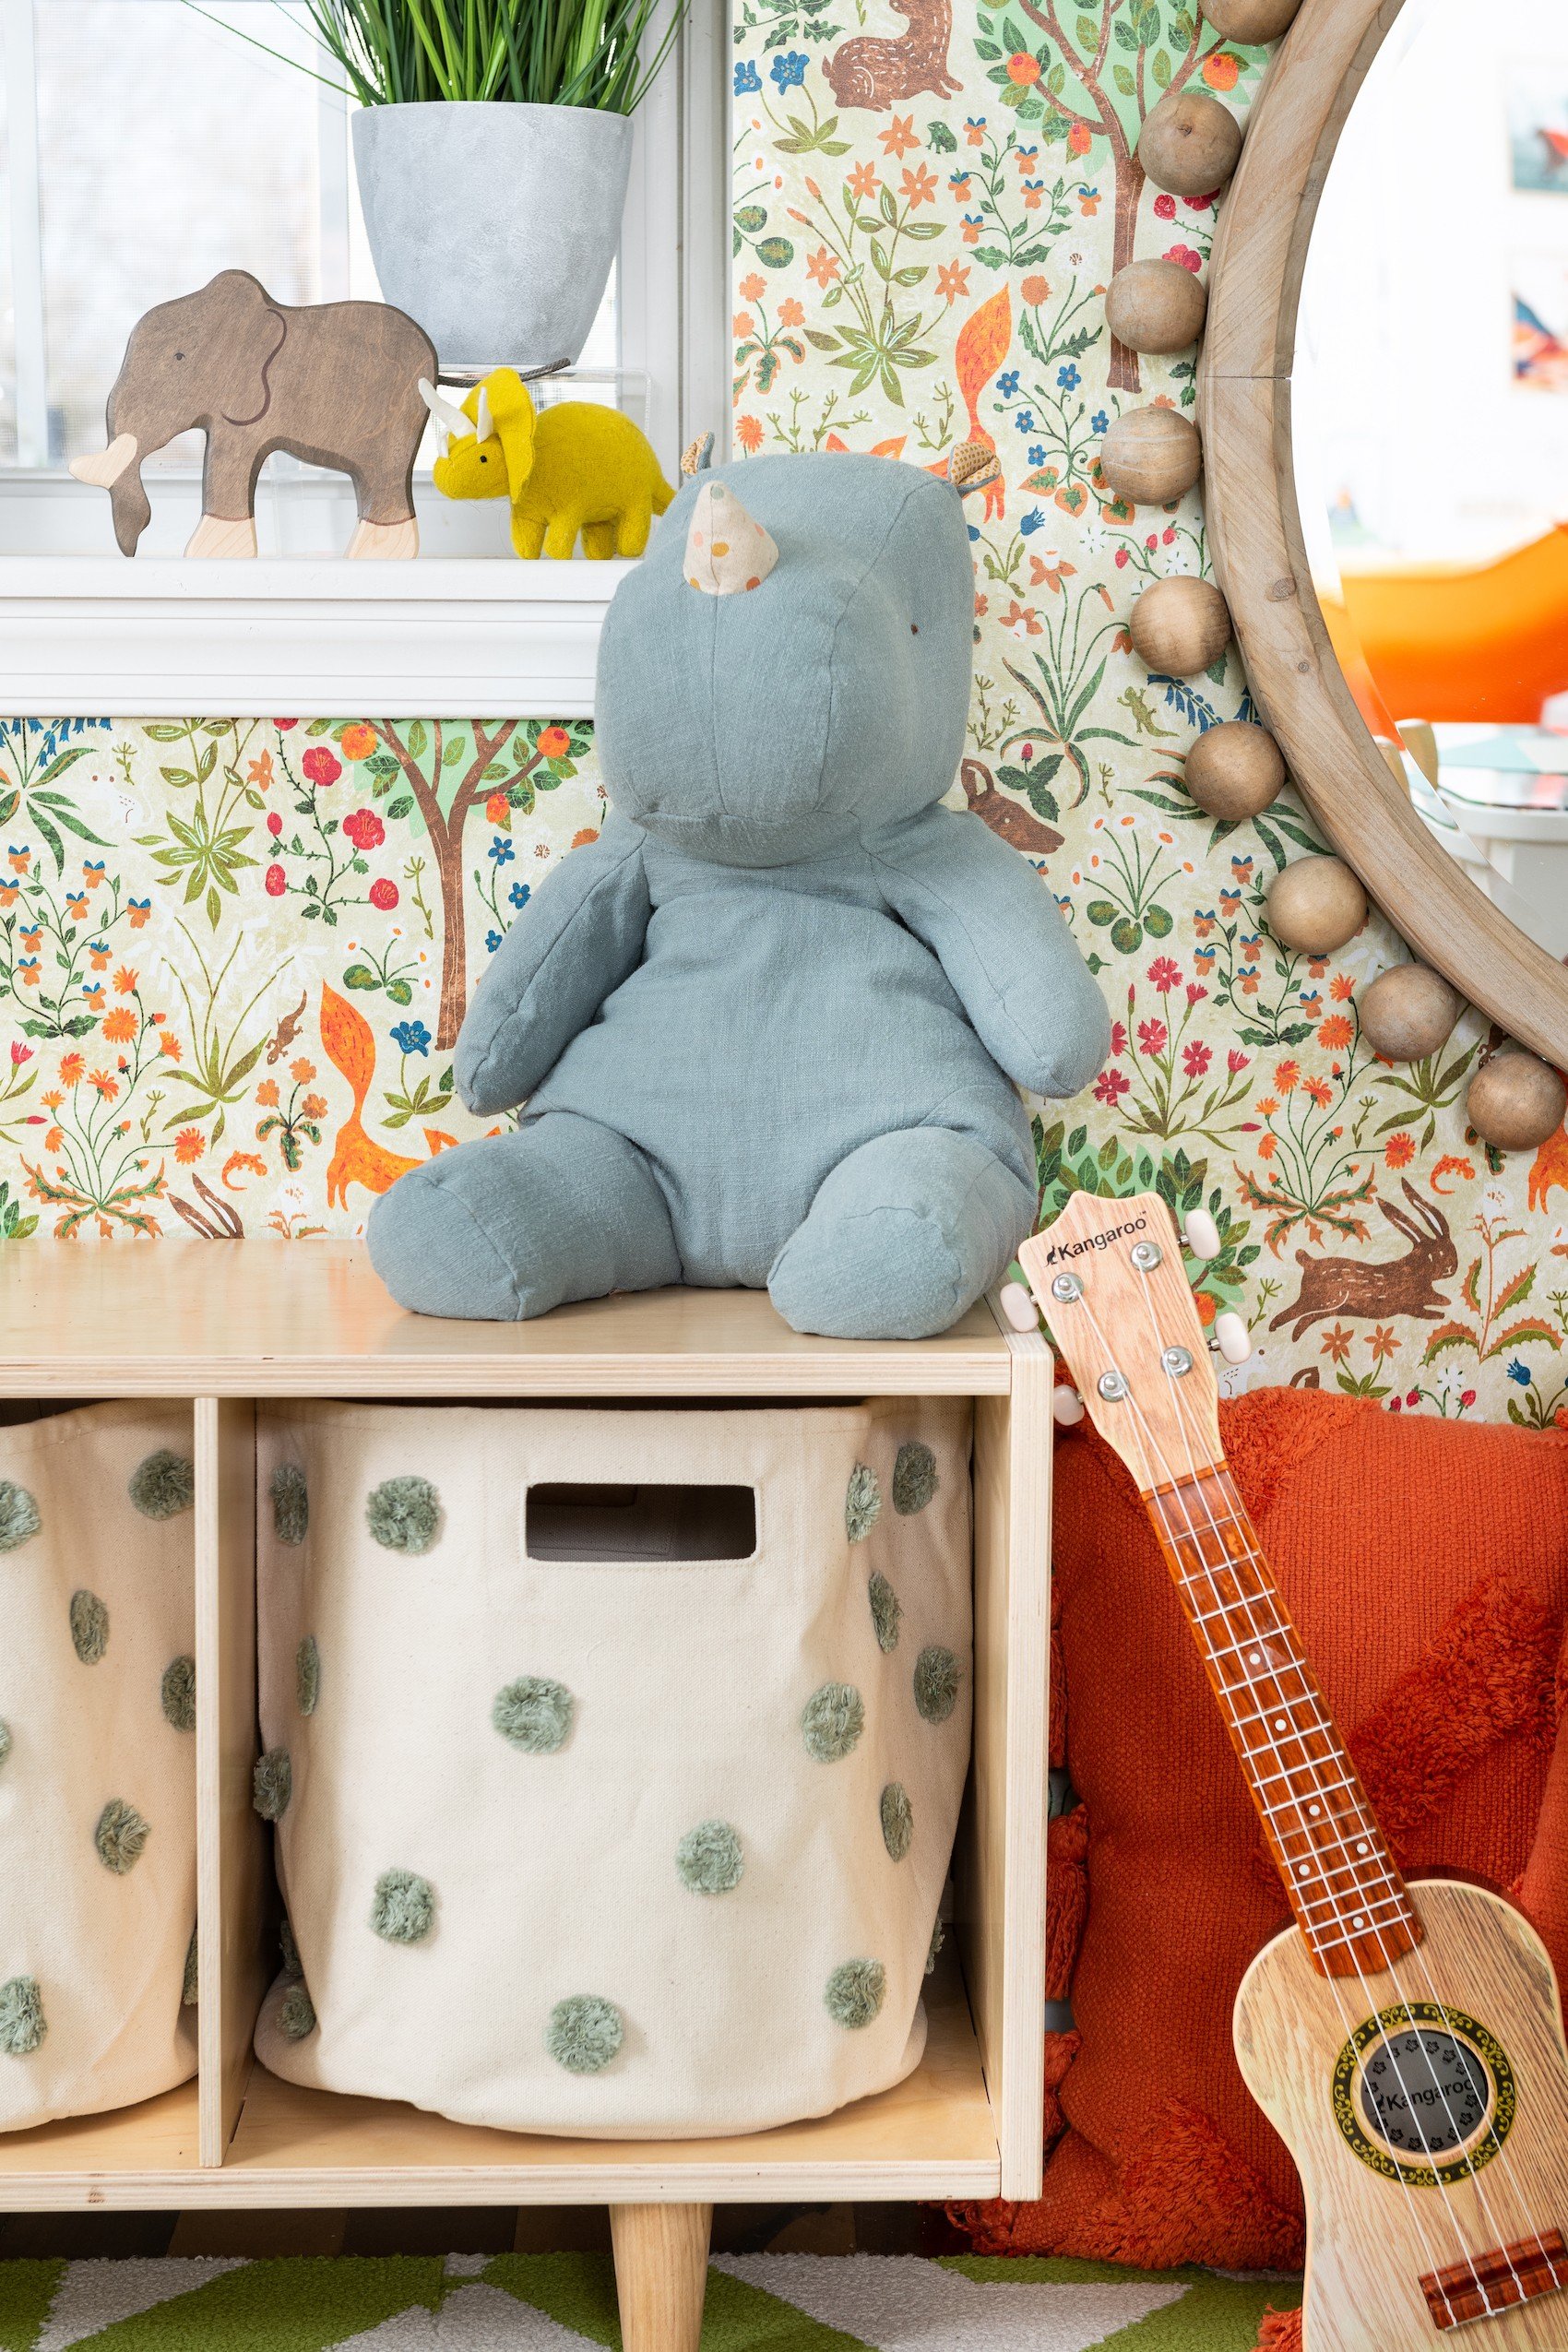 Spring into Action grOH! Playrooms —